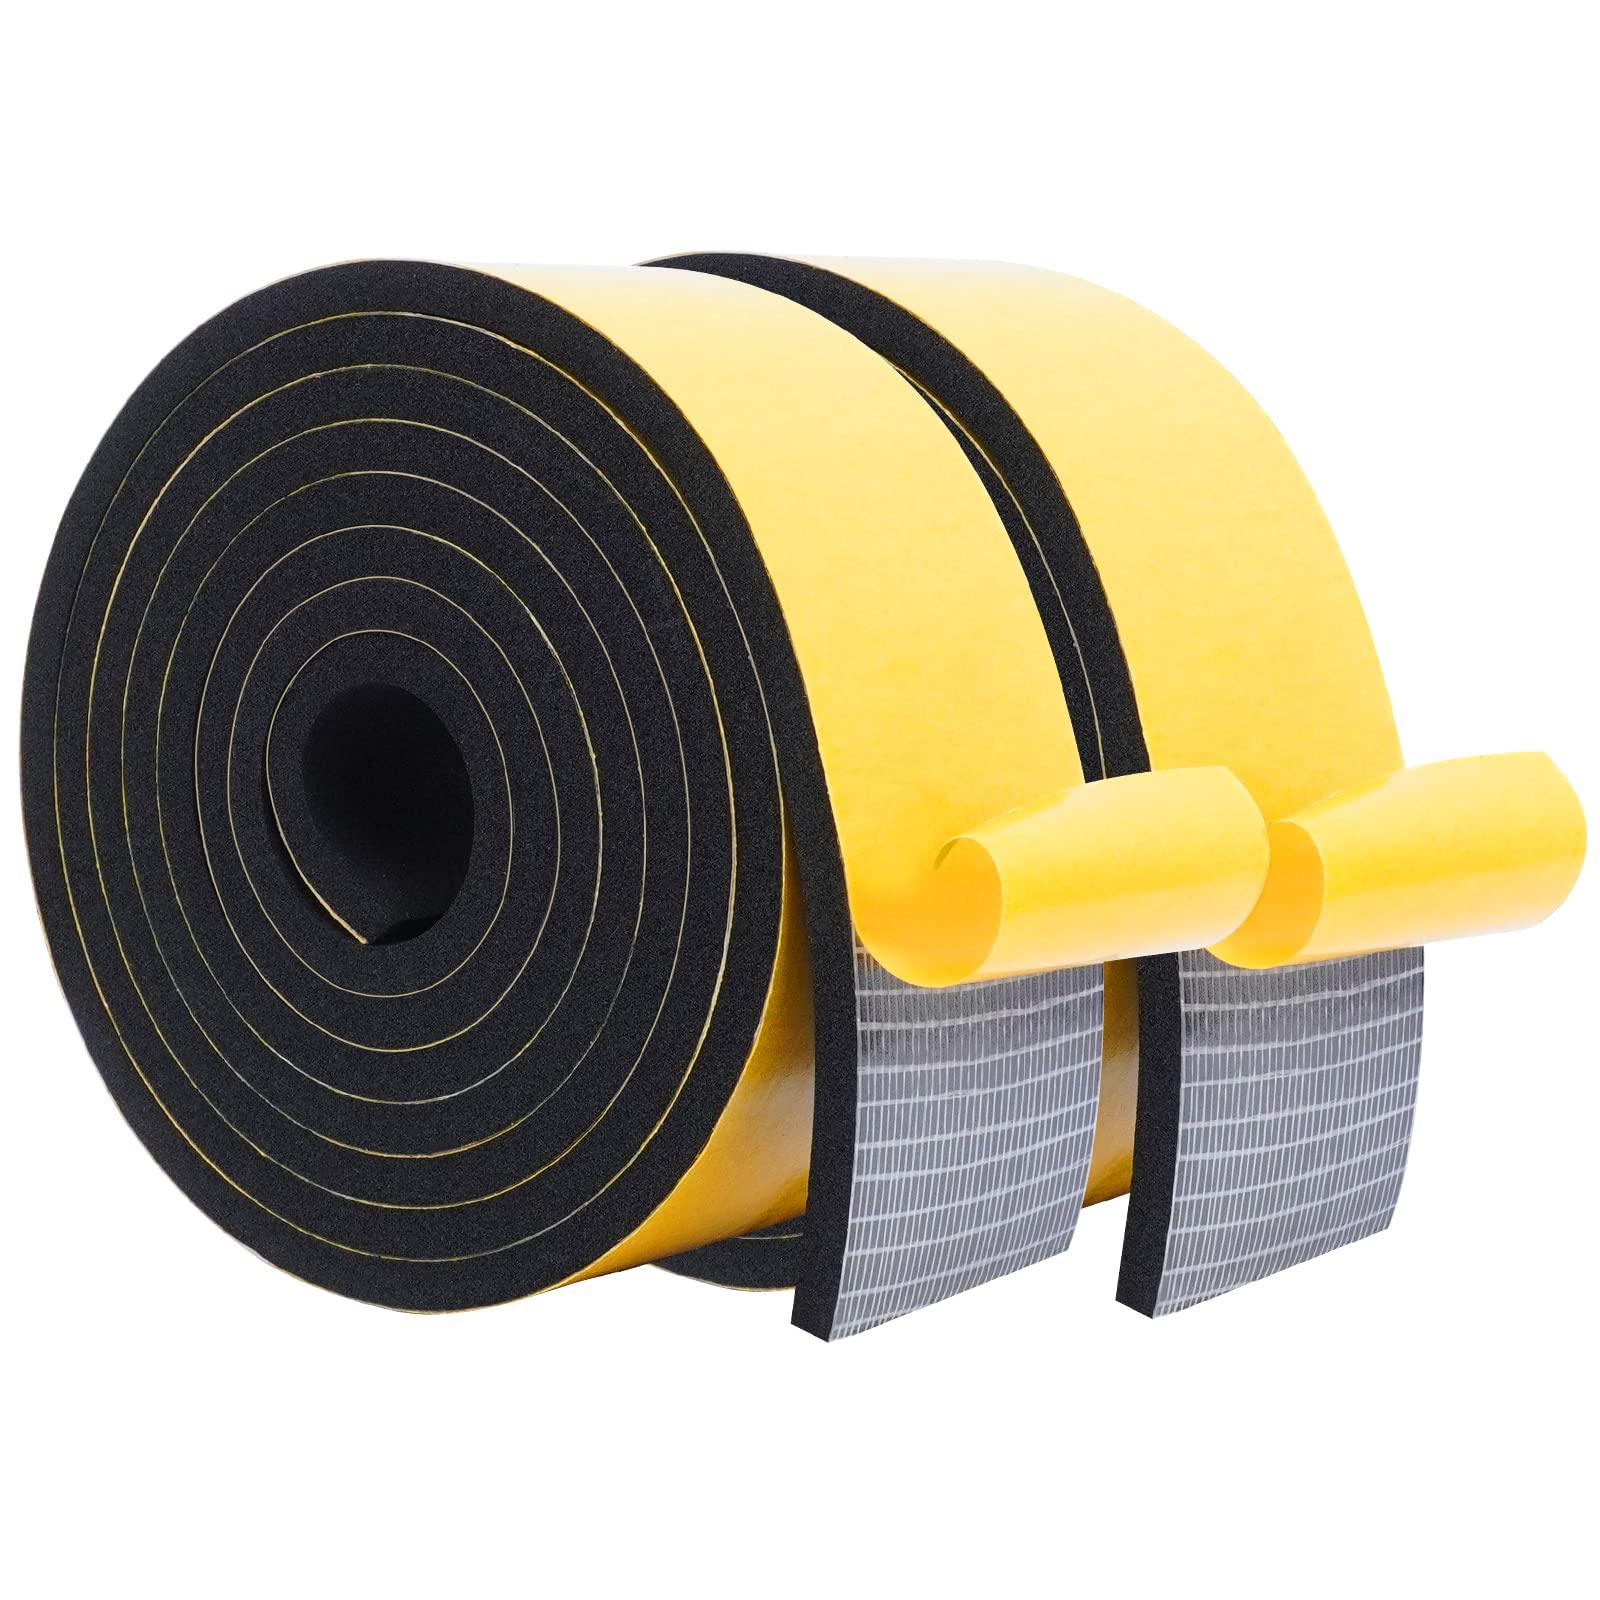 WochiTV High Density Foam Rubber Tape 50mm(W) x 6mm(T), Weatherstrip, Gasket Seal, Anti-Vibration, Anti-Collision, Shockproof, Car, Turck, Air Conditioner, Total 4m (2 Strips, 2M Long Each) 0